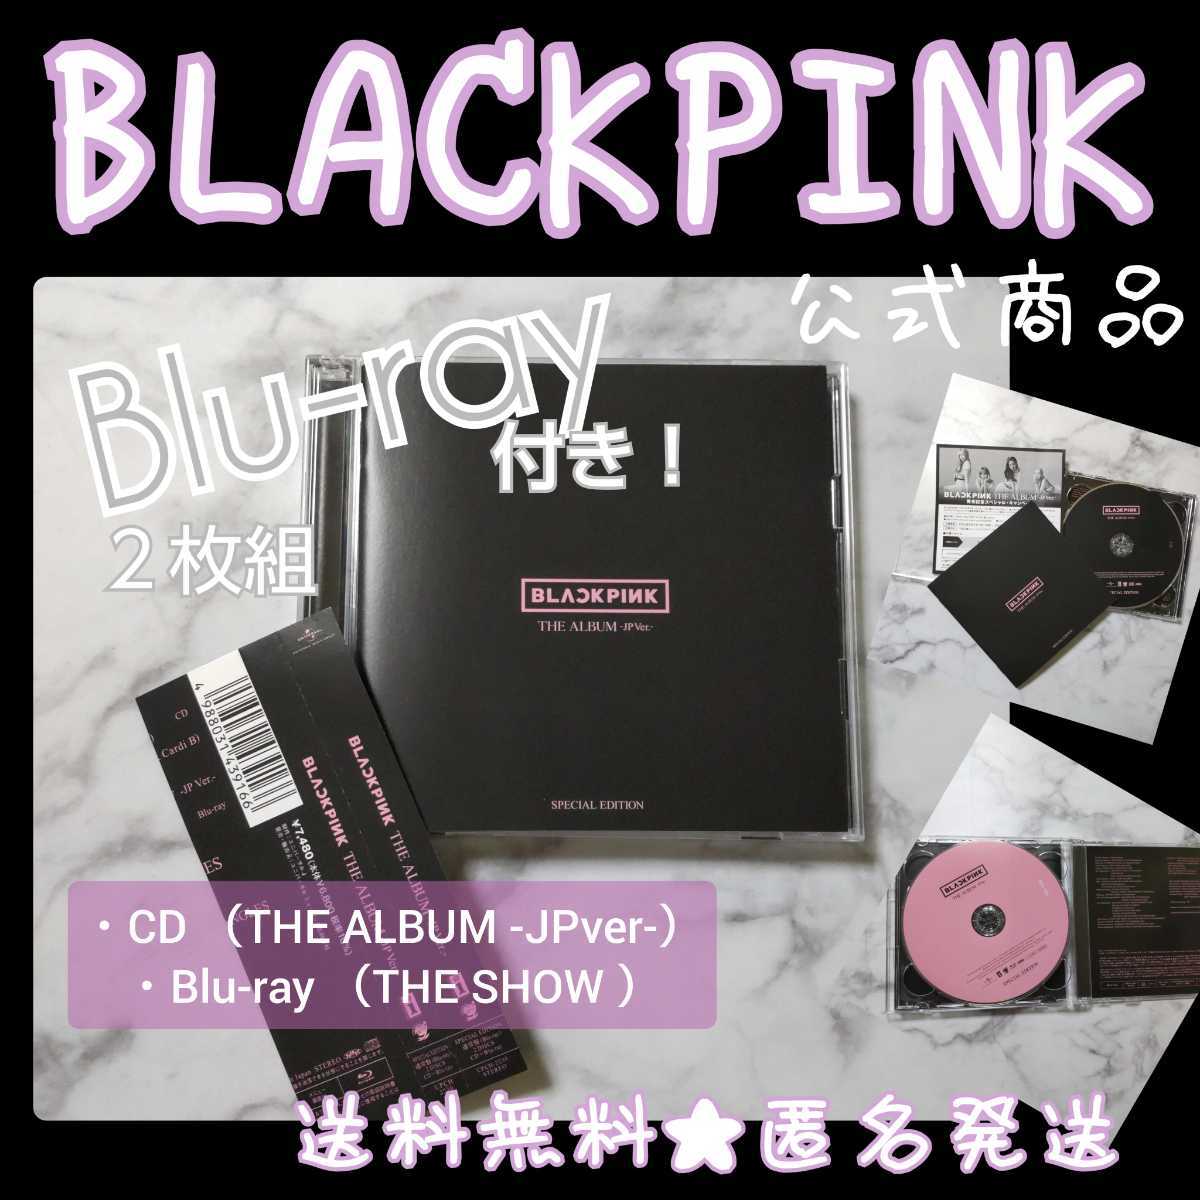 【CD＋Blu-ray ２枚組】BLACKPINK THE ALBUM -JPver- Special Edition【 通常盤】(定価¥7,480)